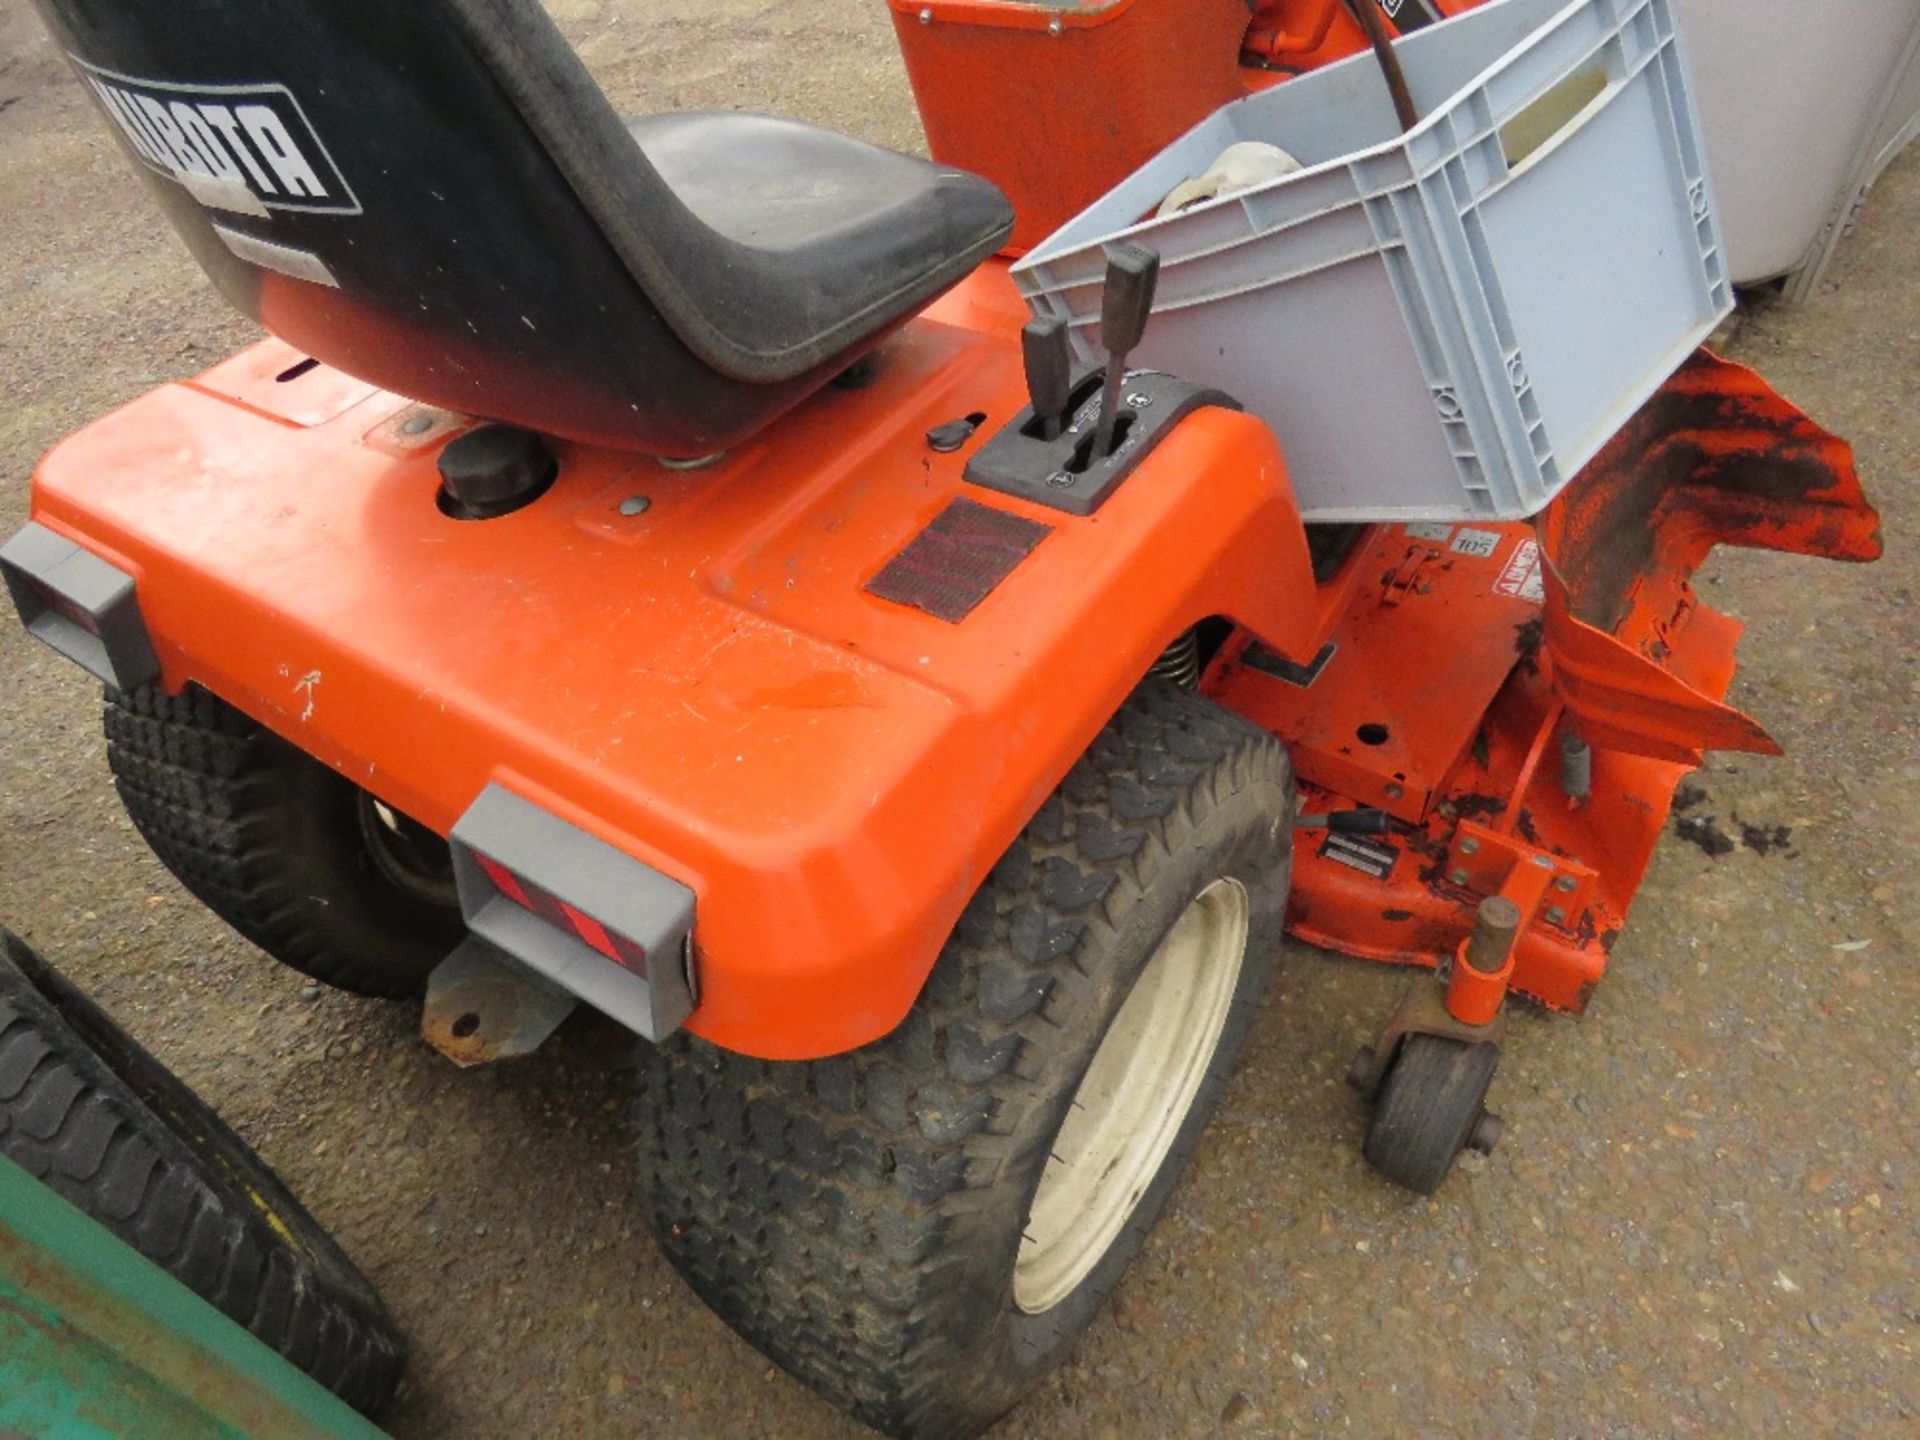 KUBOTA G1700 HST DIESEL RIDE ON MOWER. ENGINE PARTLY STRIPPED, AS SHOWN, SOLD AS UNTESTED/SPARES/REP - Image 3 of 8